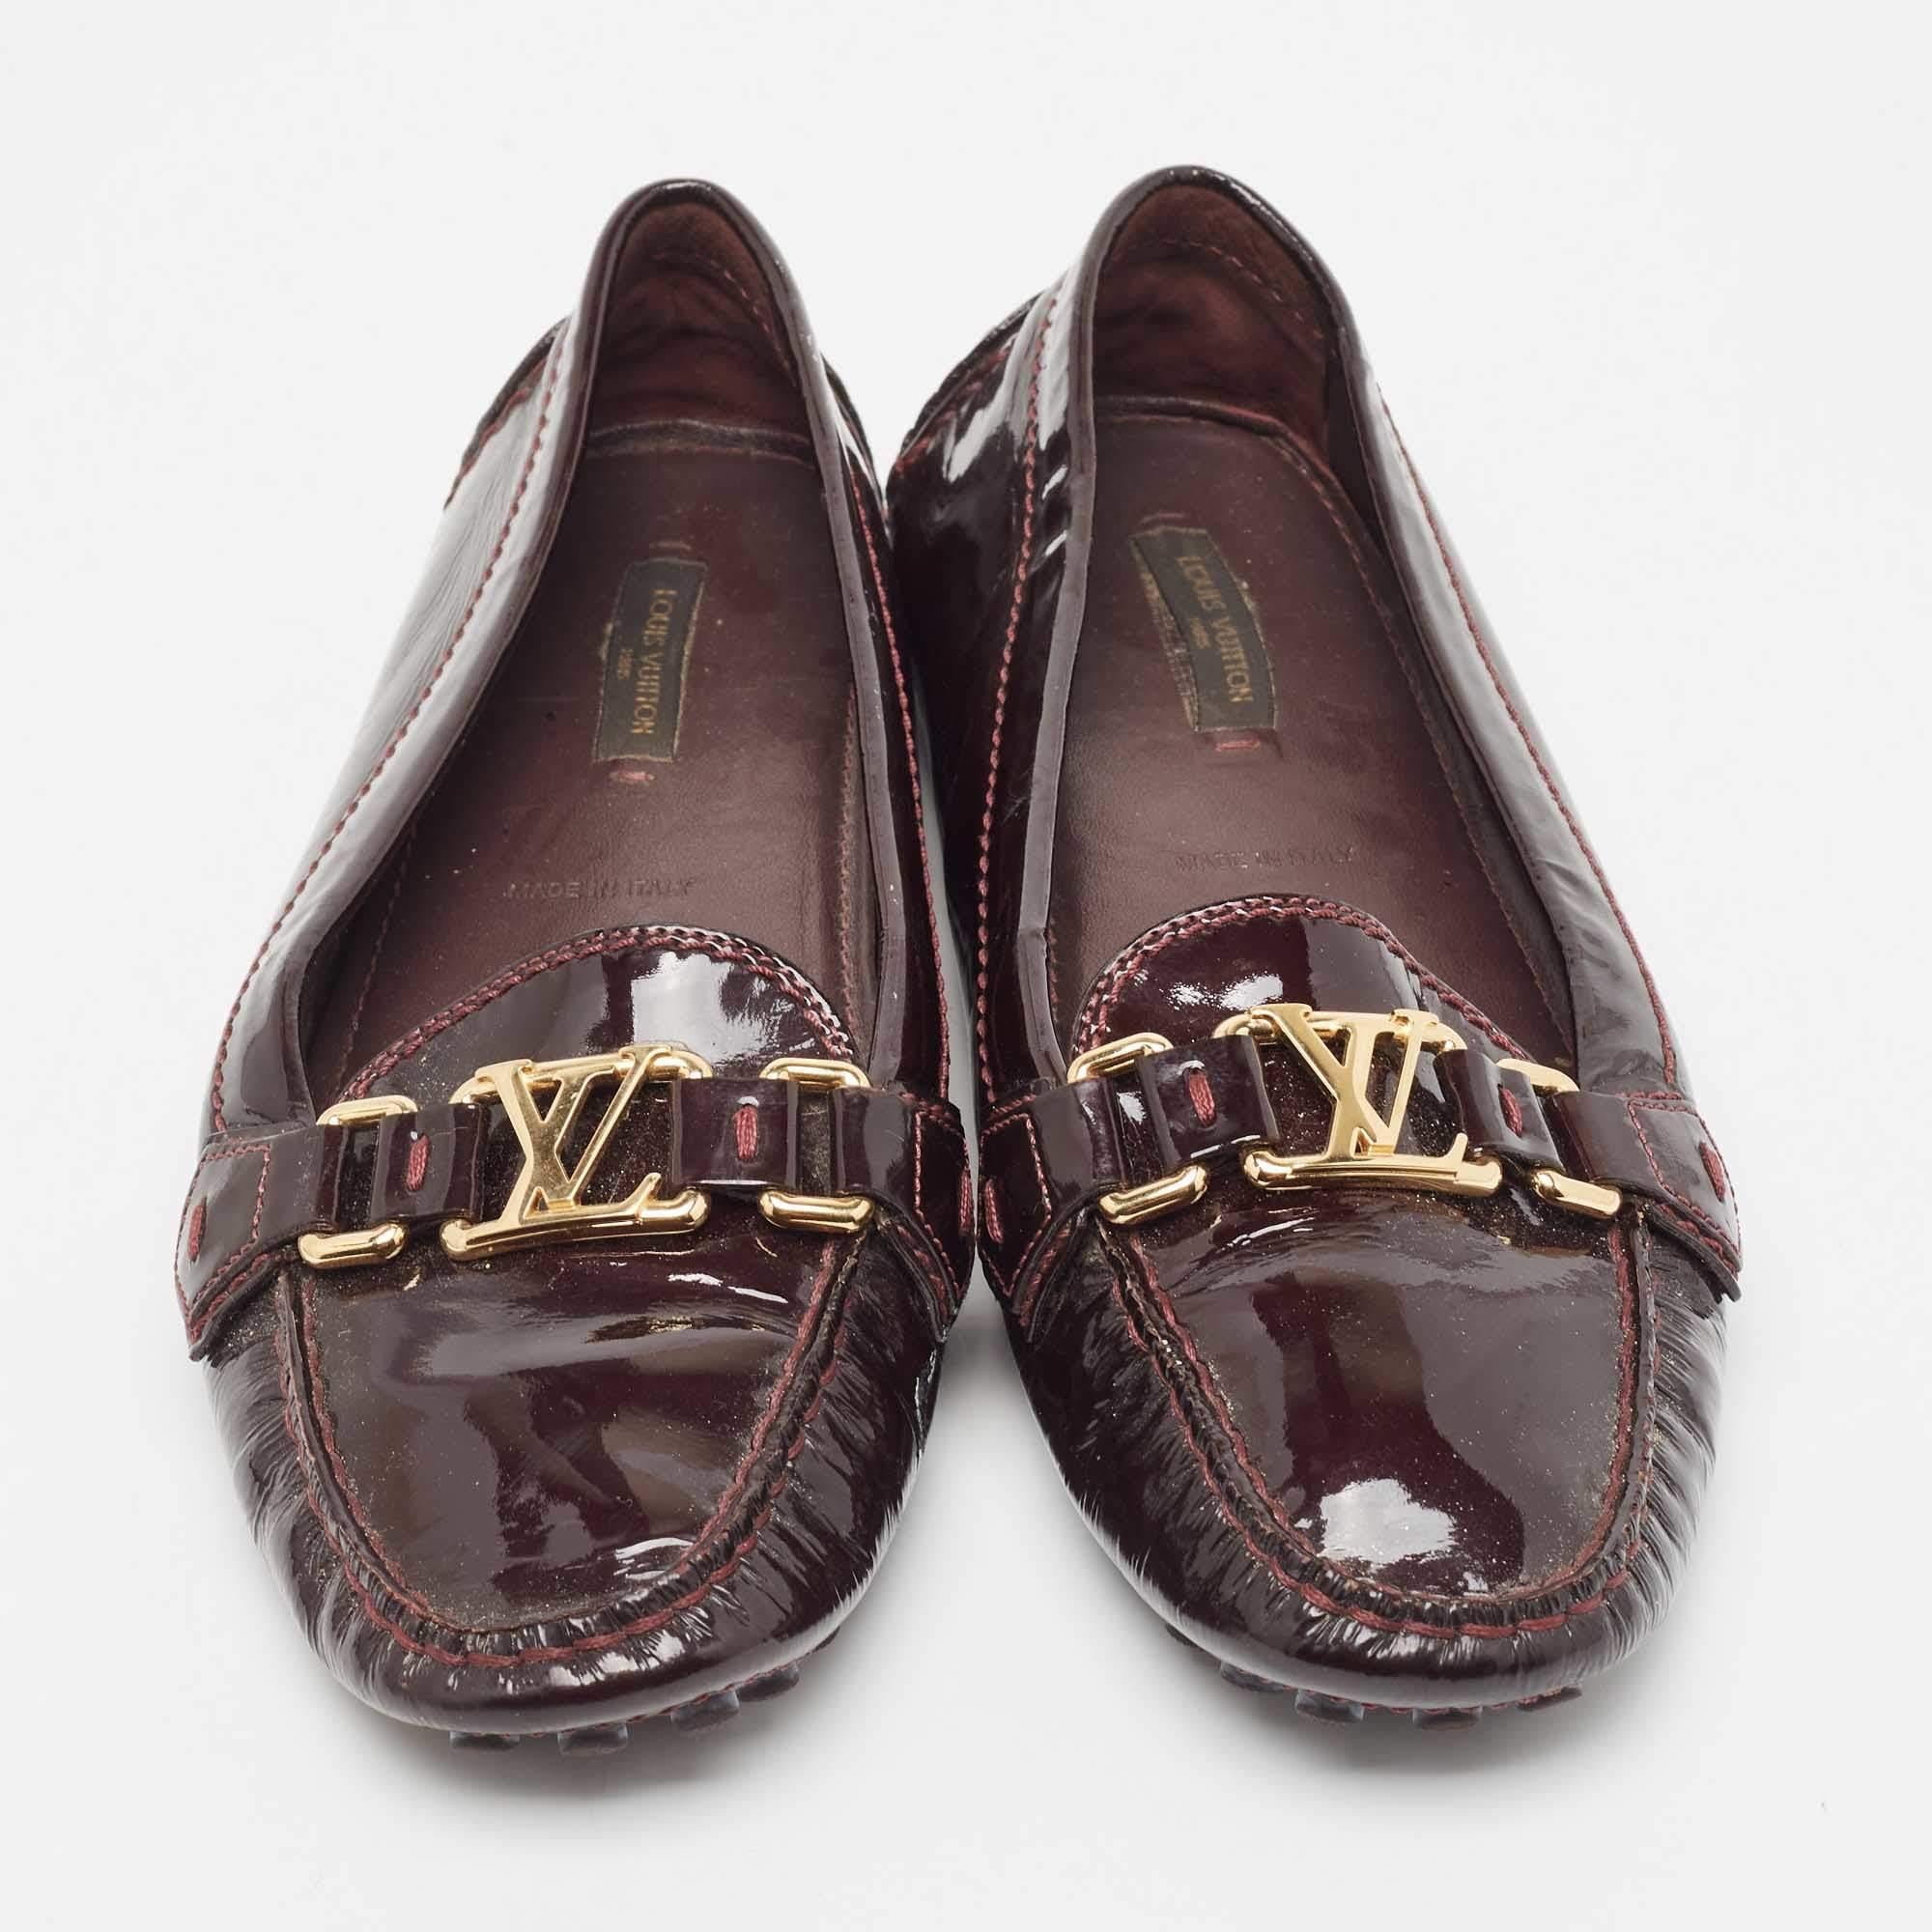 Practical, fashionable, and durable—these LV burgundy loafers are carefully built to be fine companions to your everyday style. They come made using the best materials to be a prized buy.

